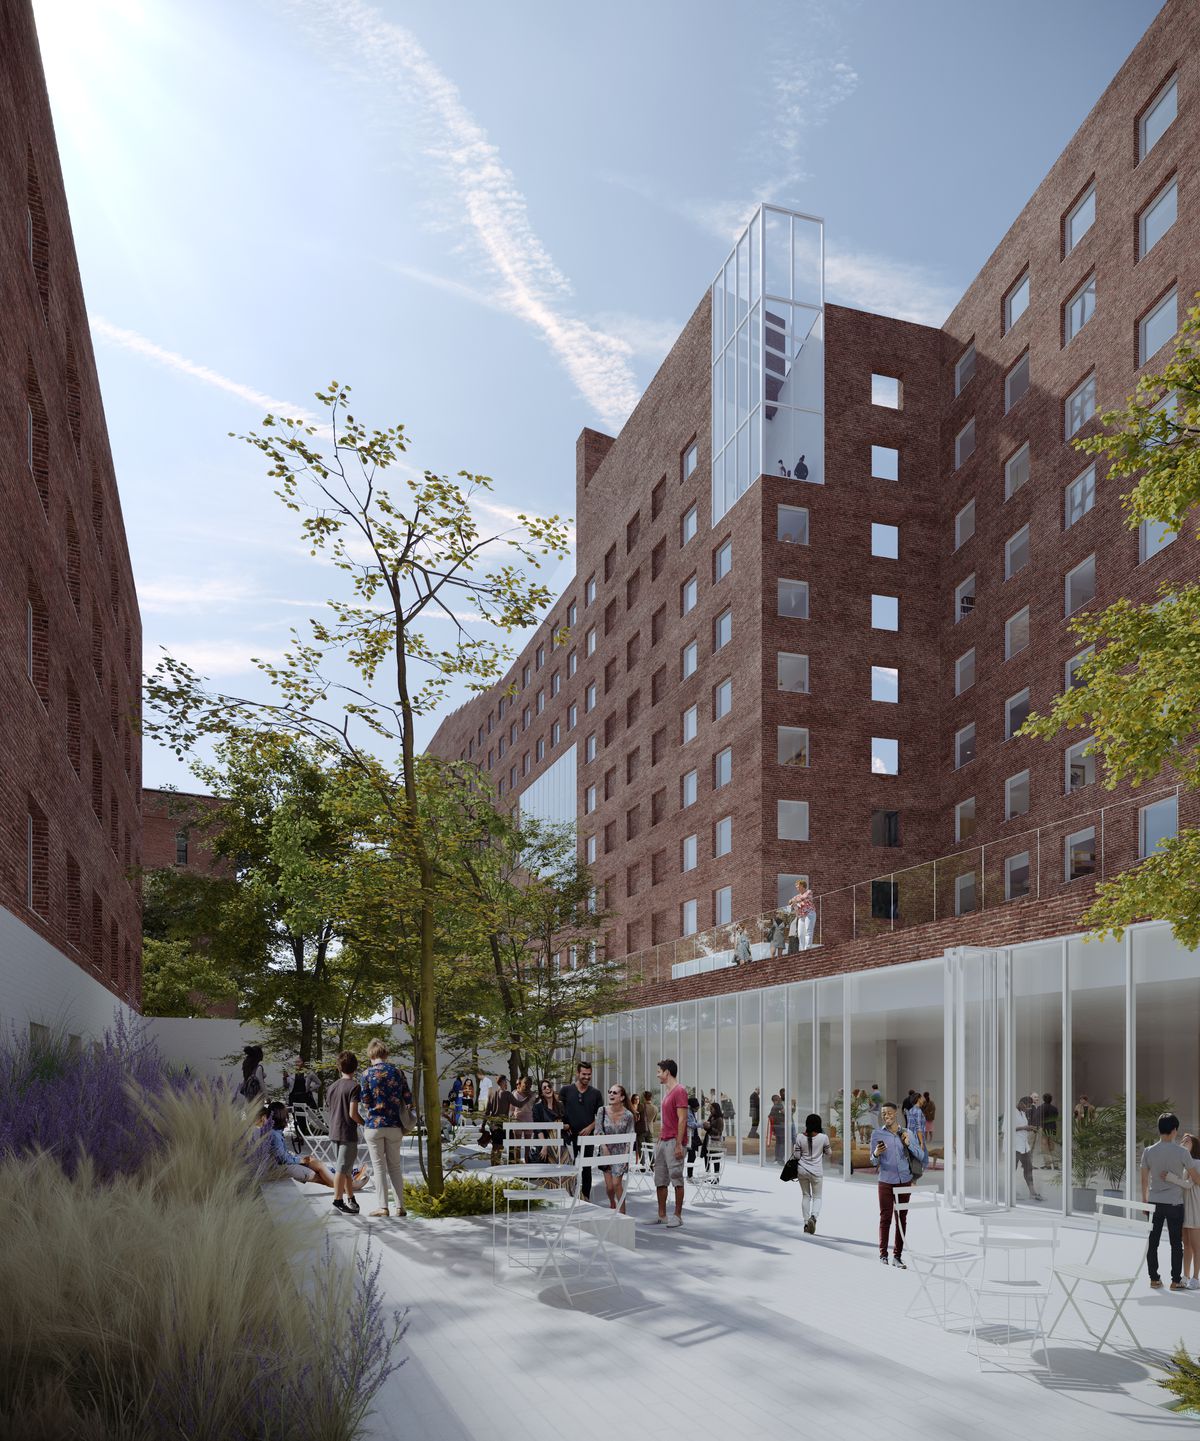 A digital rendering shows a red brick building with  enclosed glass spaces that allow visitors to glimpse at the space within. At the base of the building is a populated plaza with tables, chairs and trees.